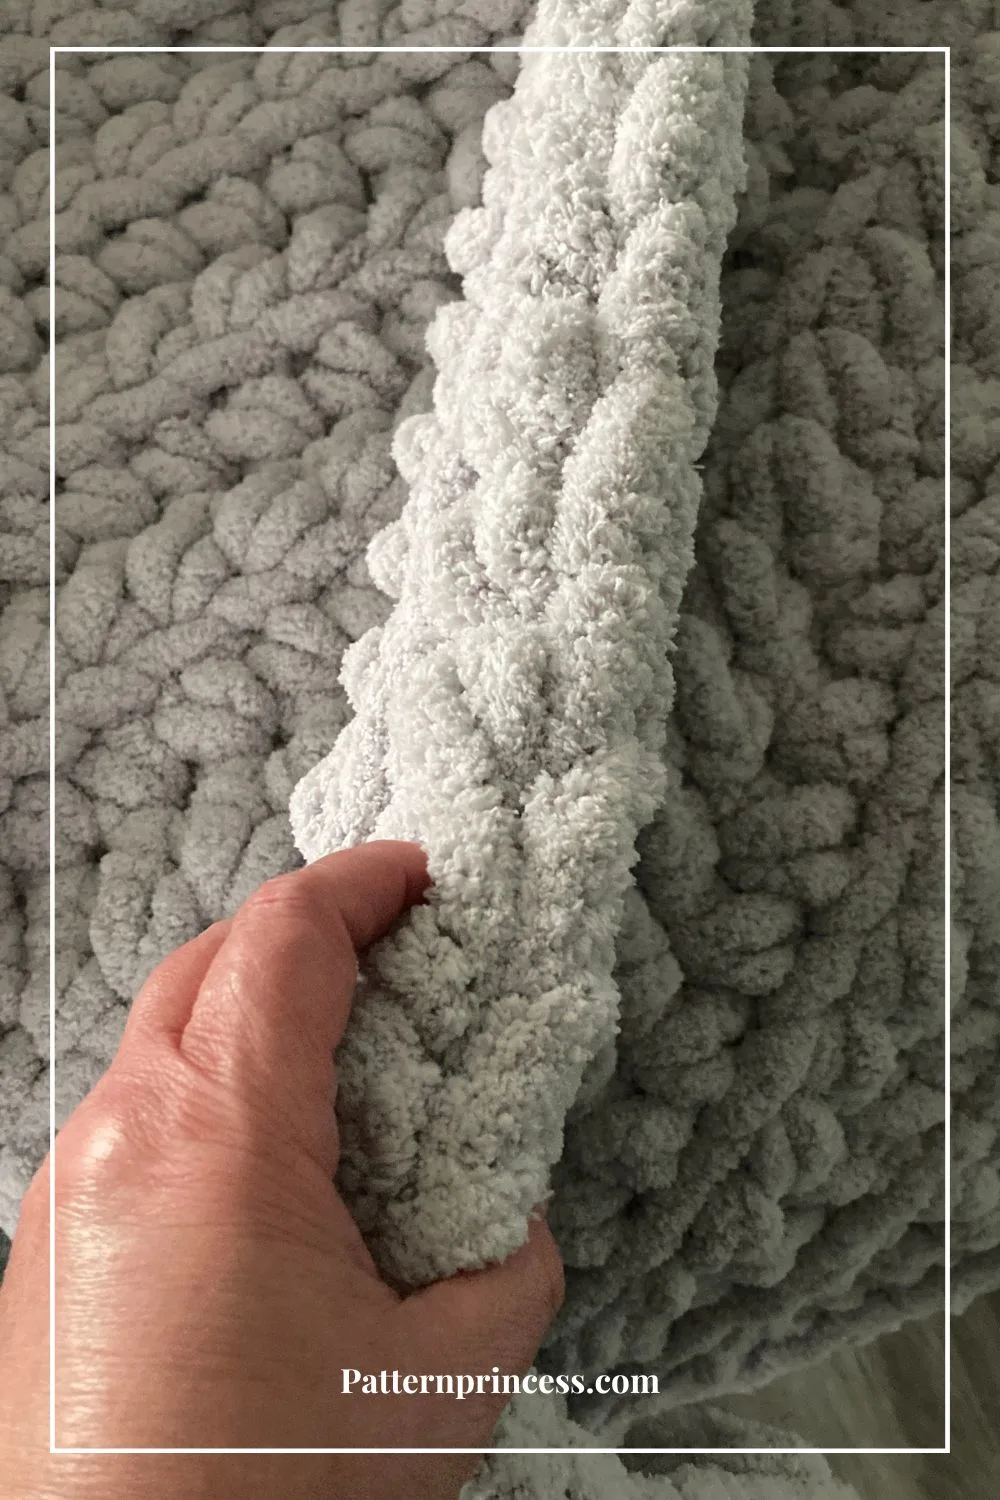 Close up showing the thickness of the blanket